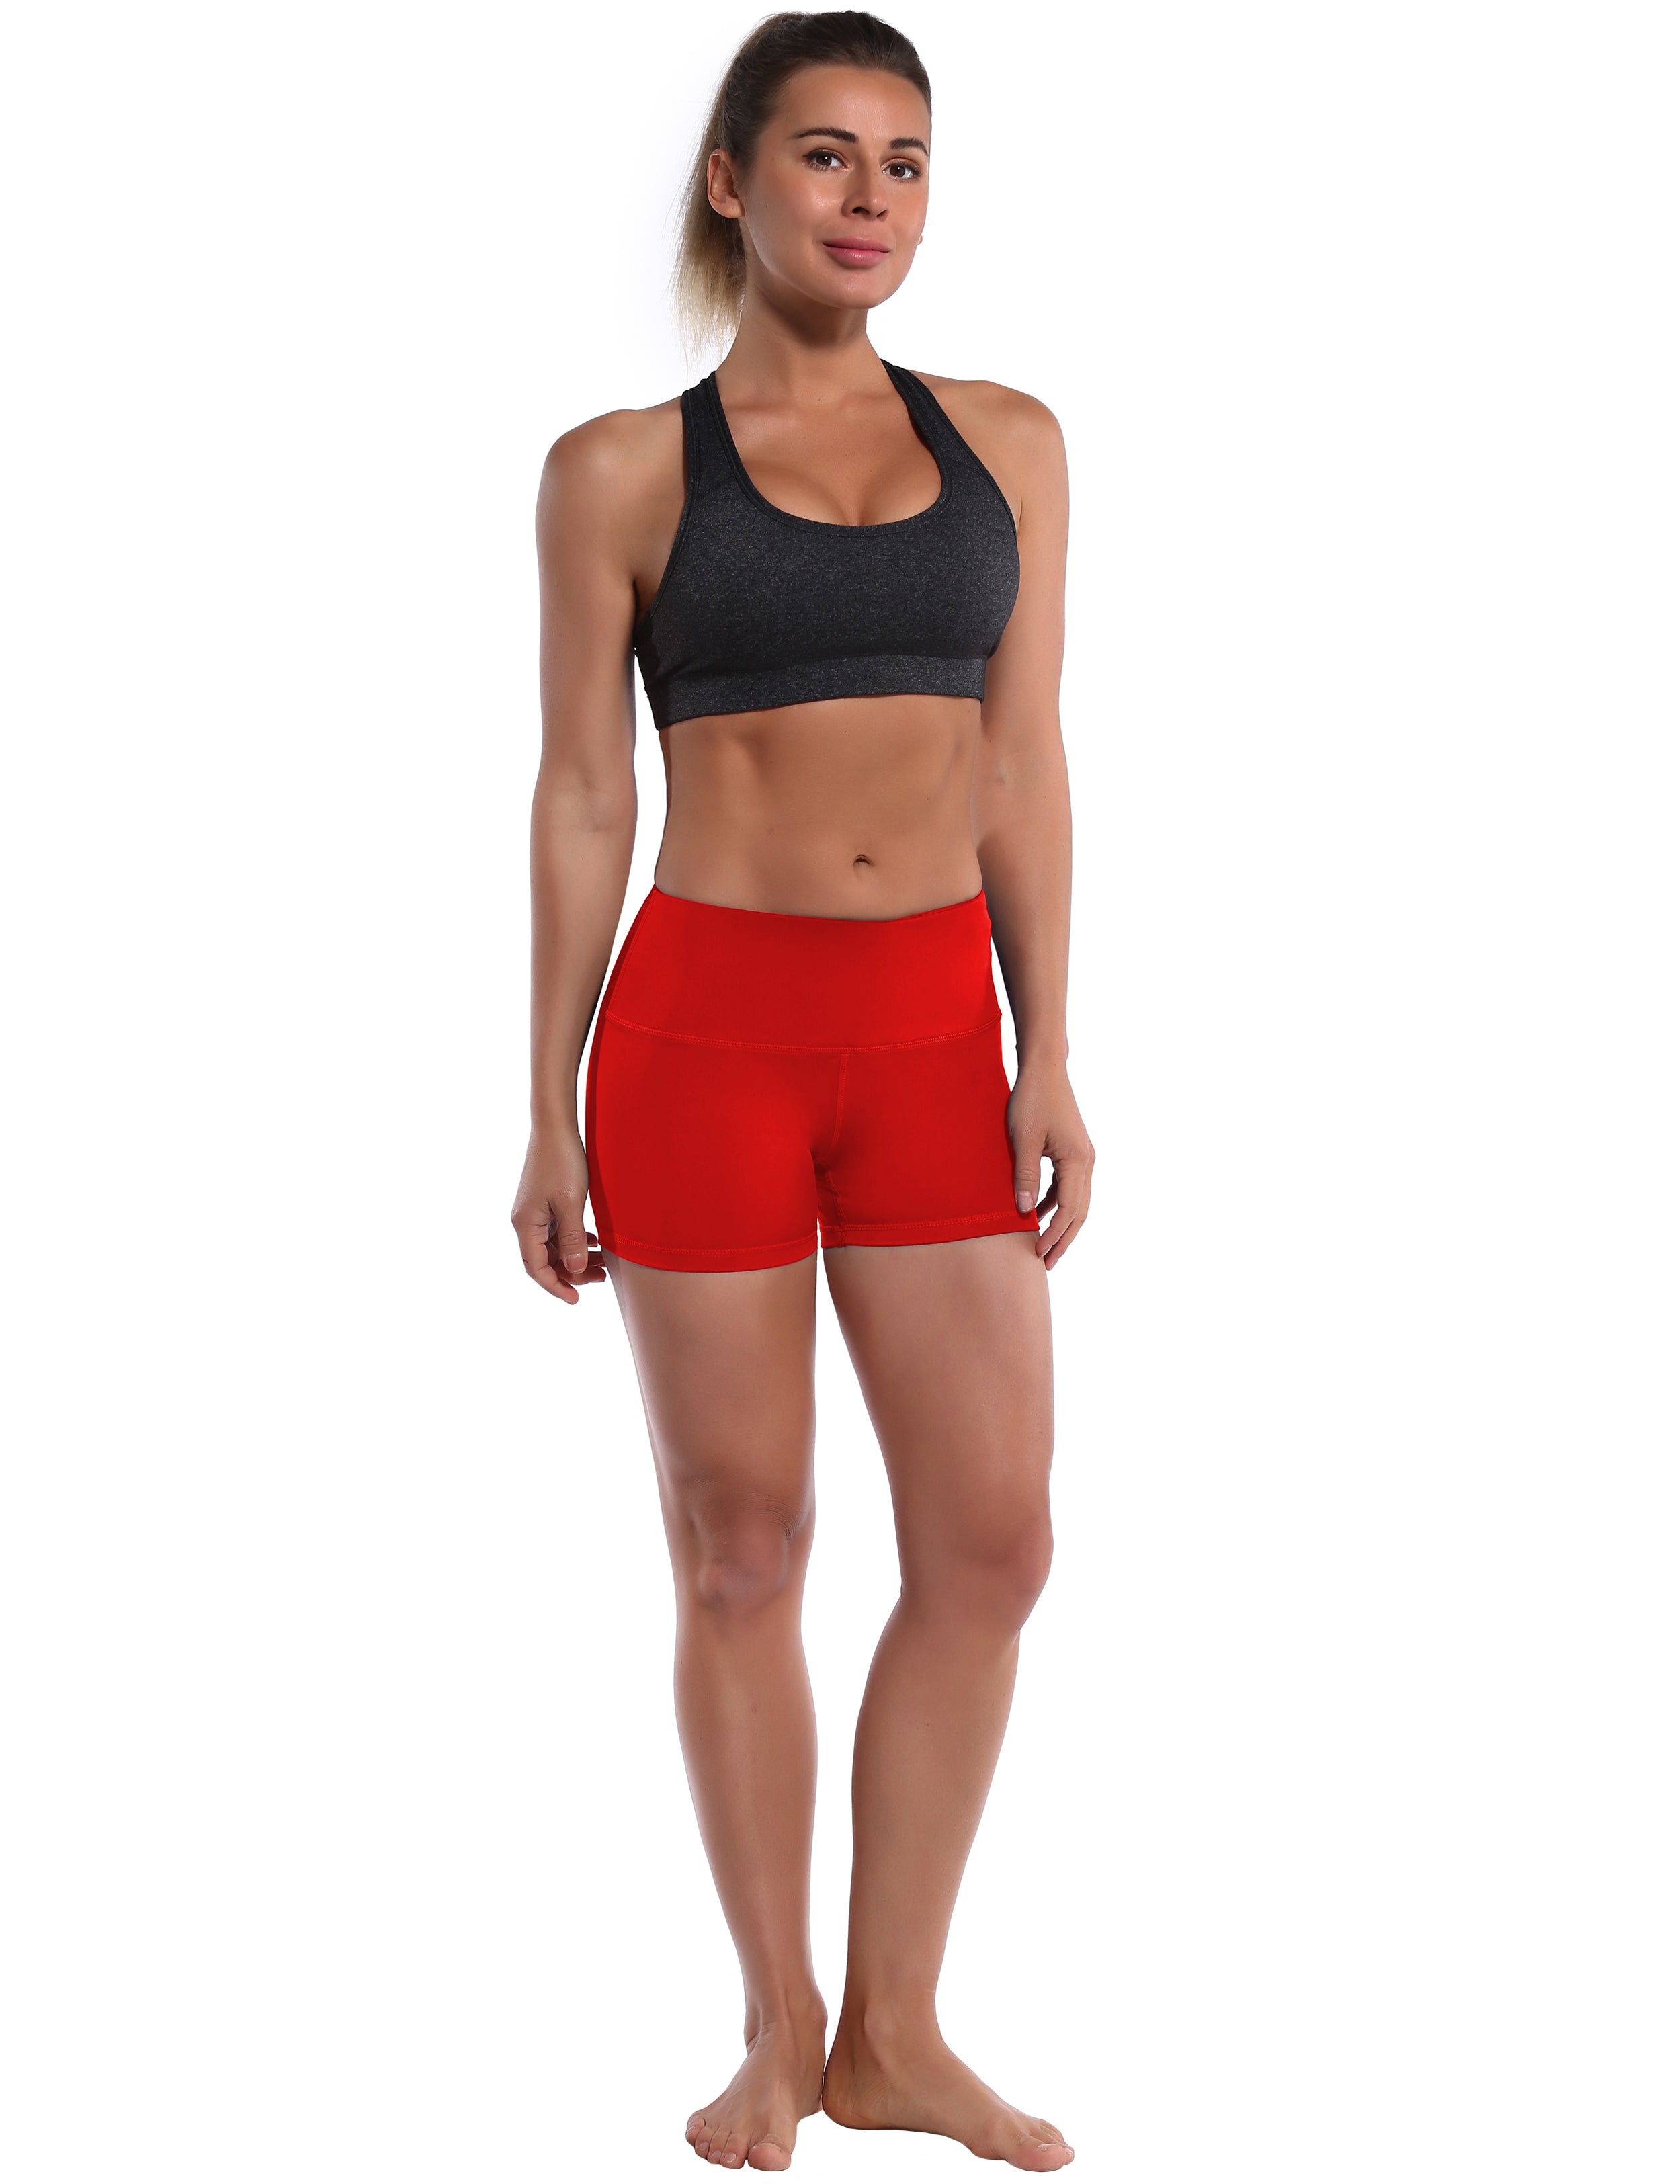 2.5" Yoga Shorts scarlet Softest-ever fabric High elasticity High density 4-way stretch Fabric doesn't attract lint easily No see-through Moisture-wicking Machine wash 75% Nylon, 25% Spandex